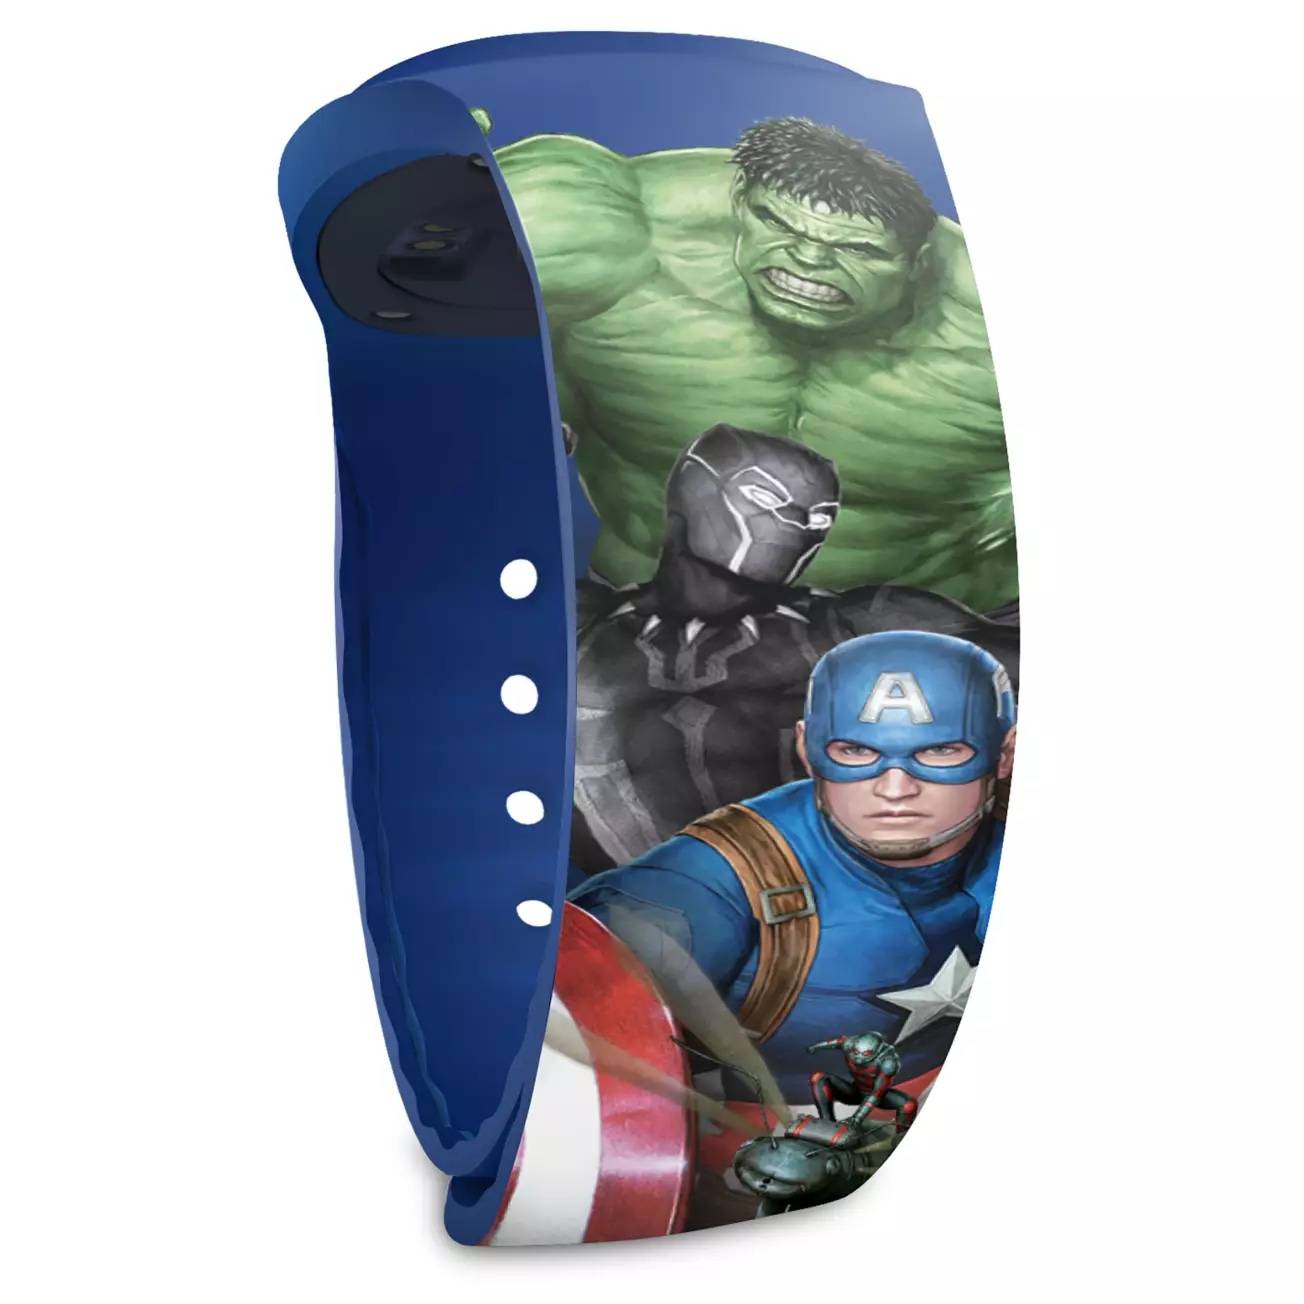 New MagicBand+ designs - August 17 2022